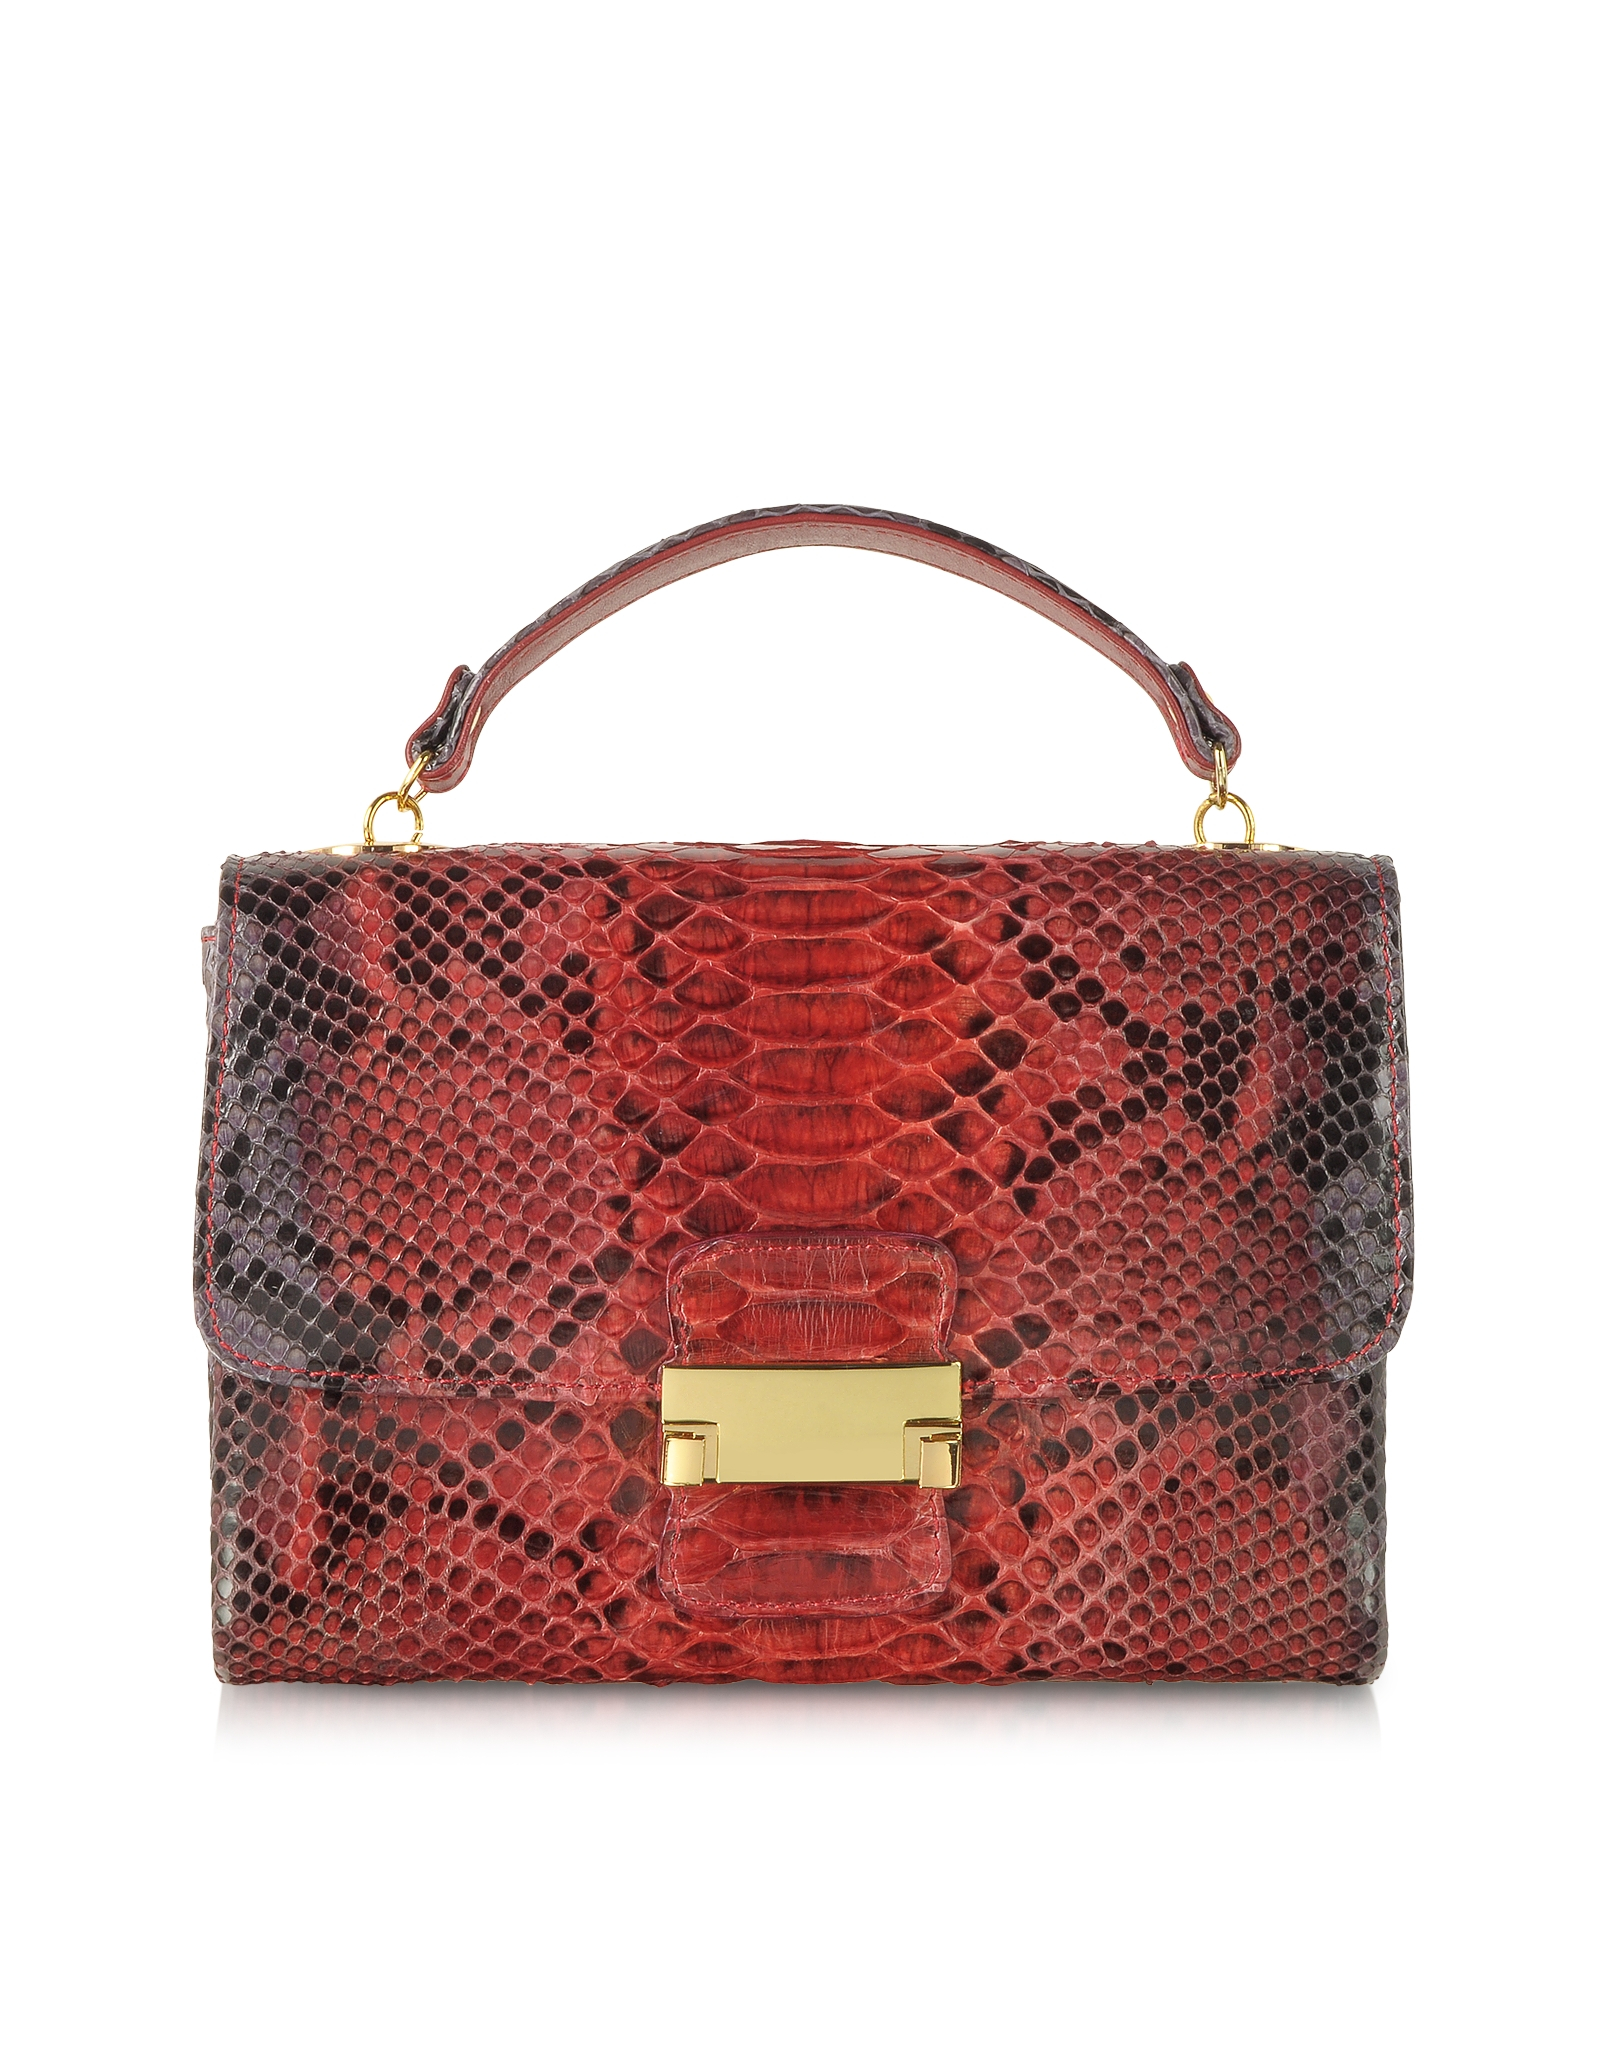 Lyst - Ghibli Red Python Leather Mini Bag in Red